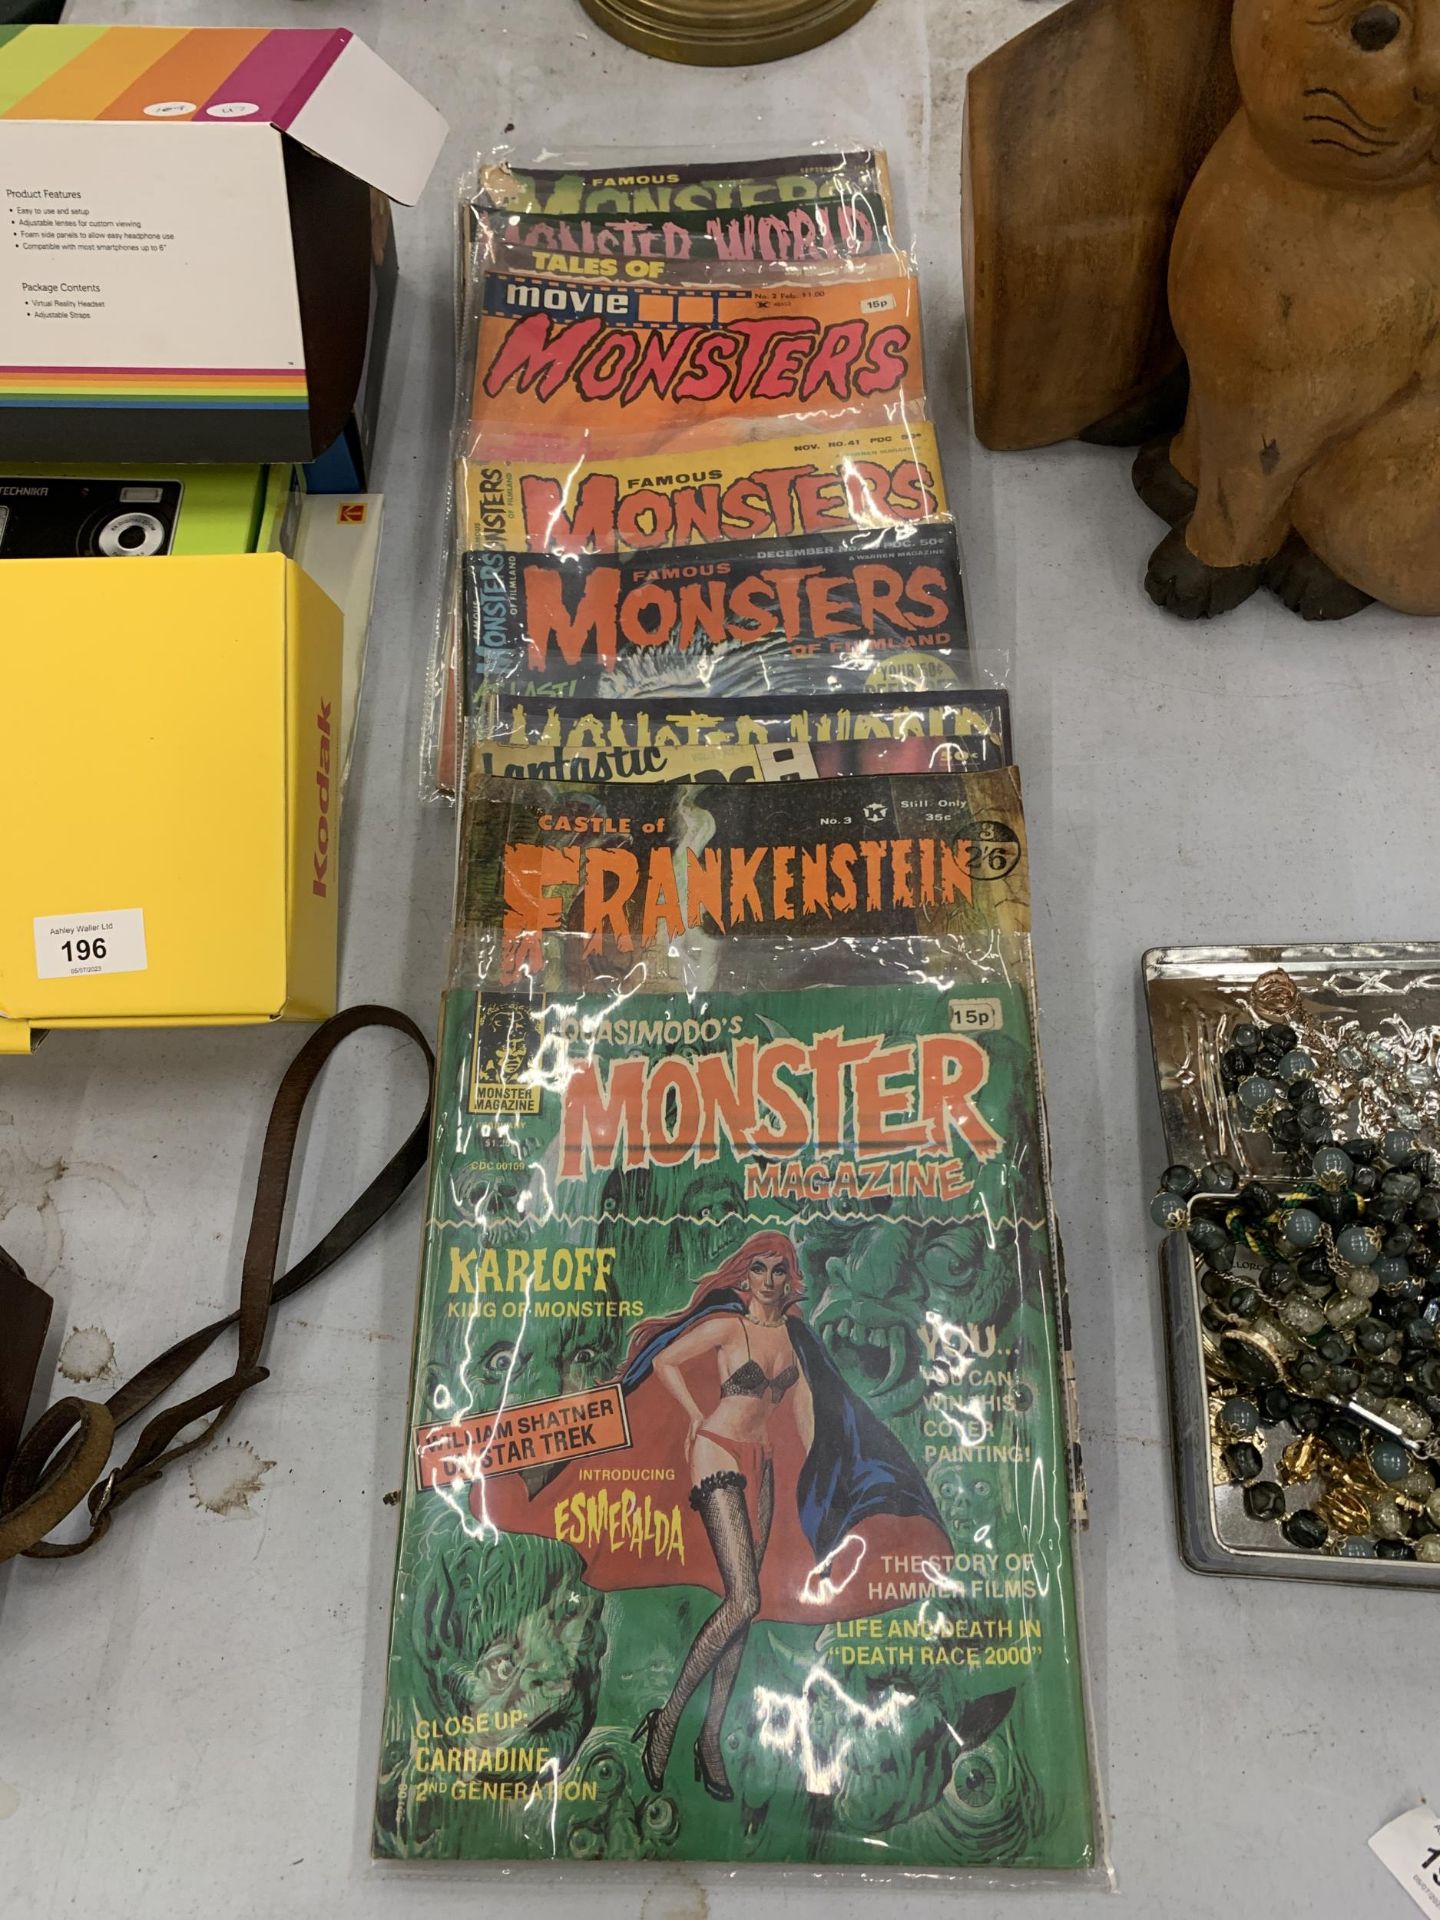 A COLLECTION OF VINTAGE MONSTERS MAGAZINES - 11 IN TOTAL